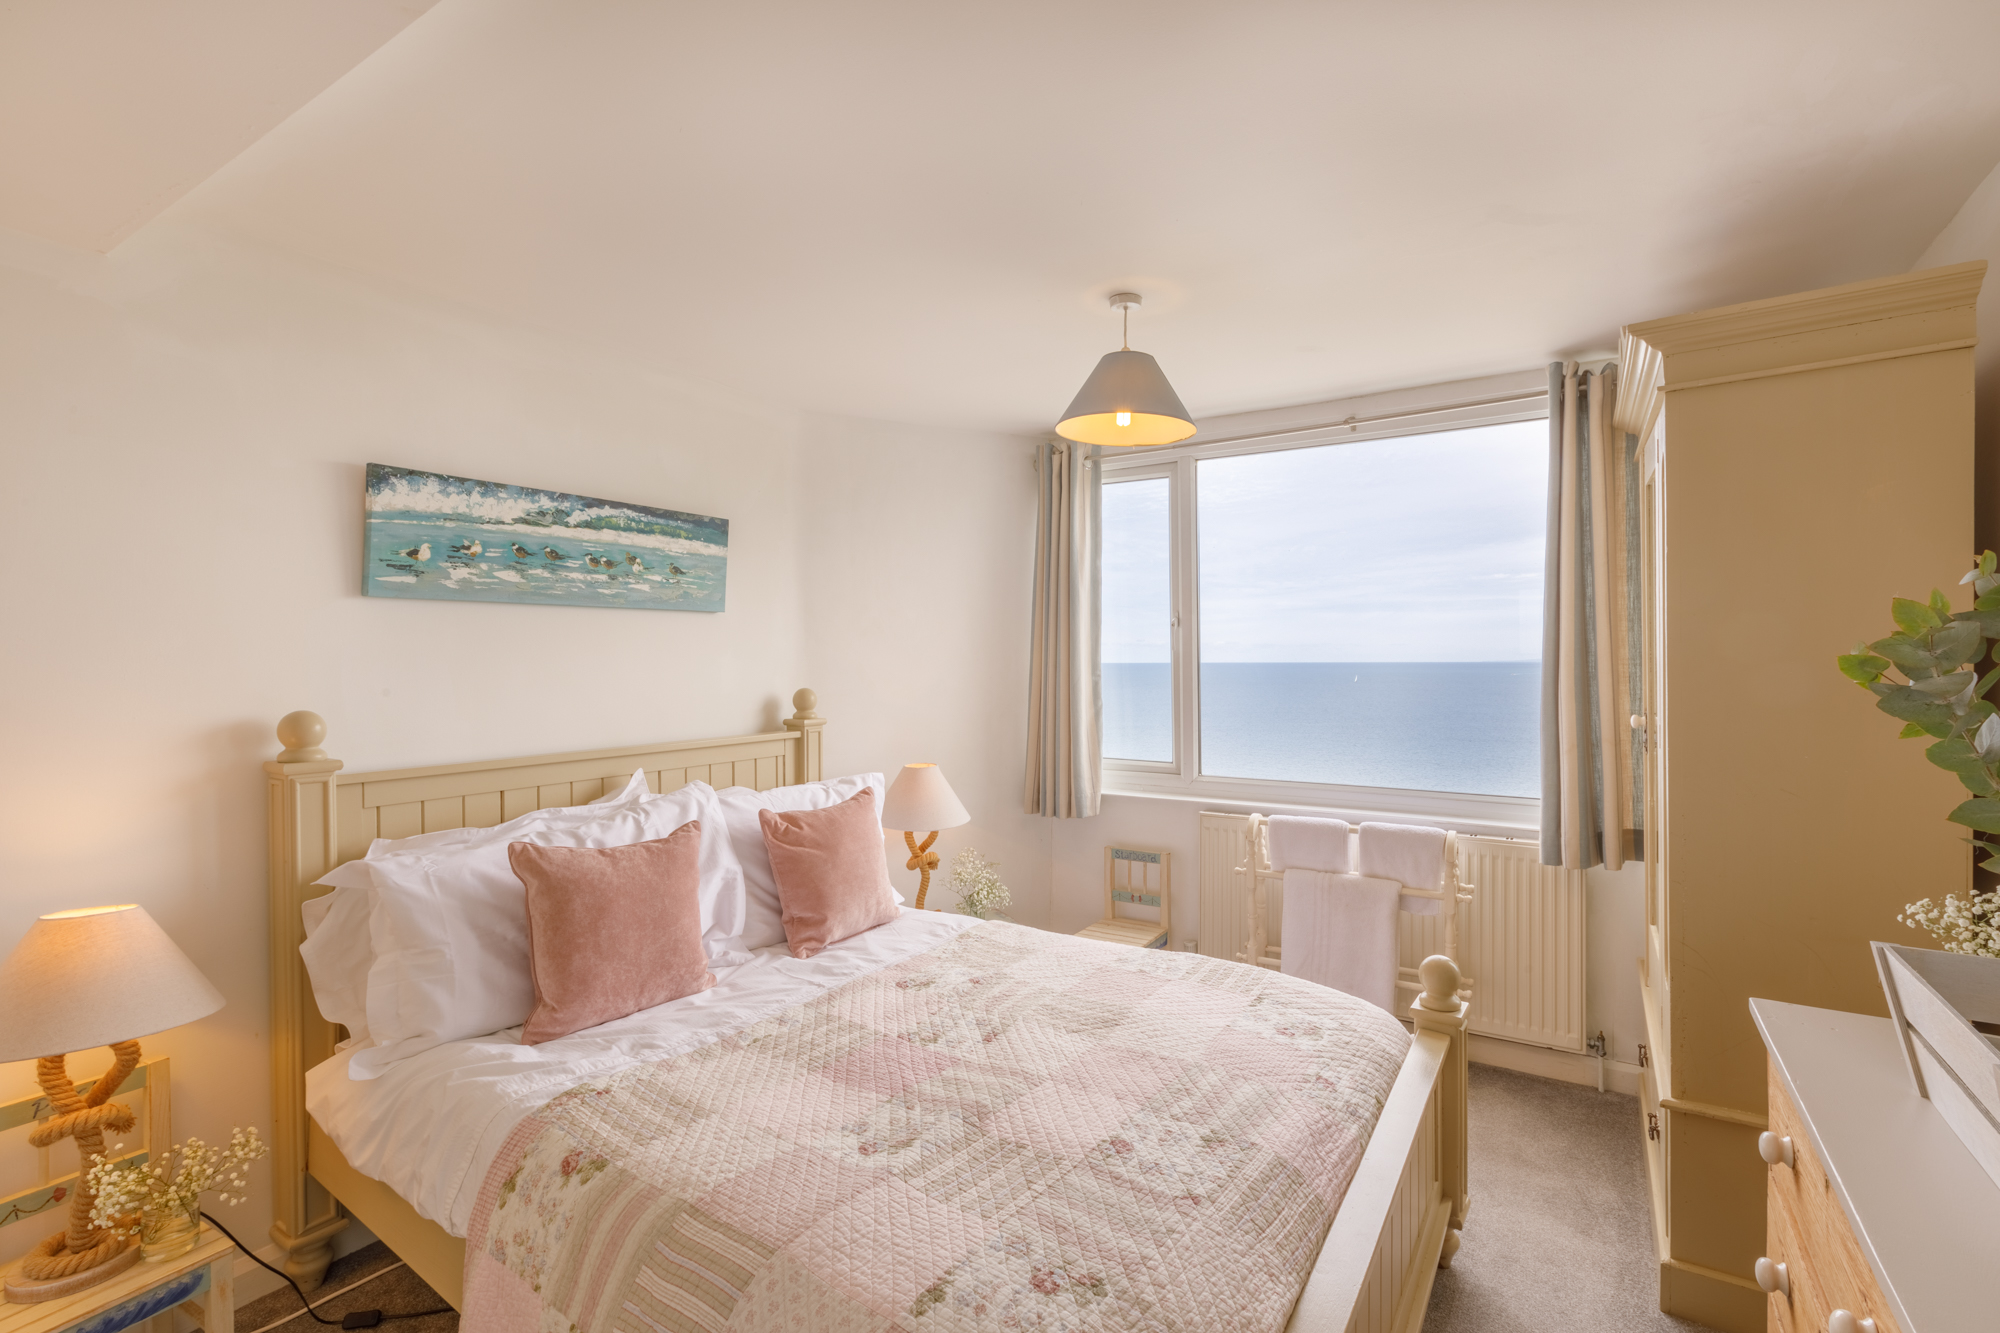 Calm bedroom with sea view